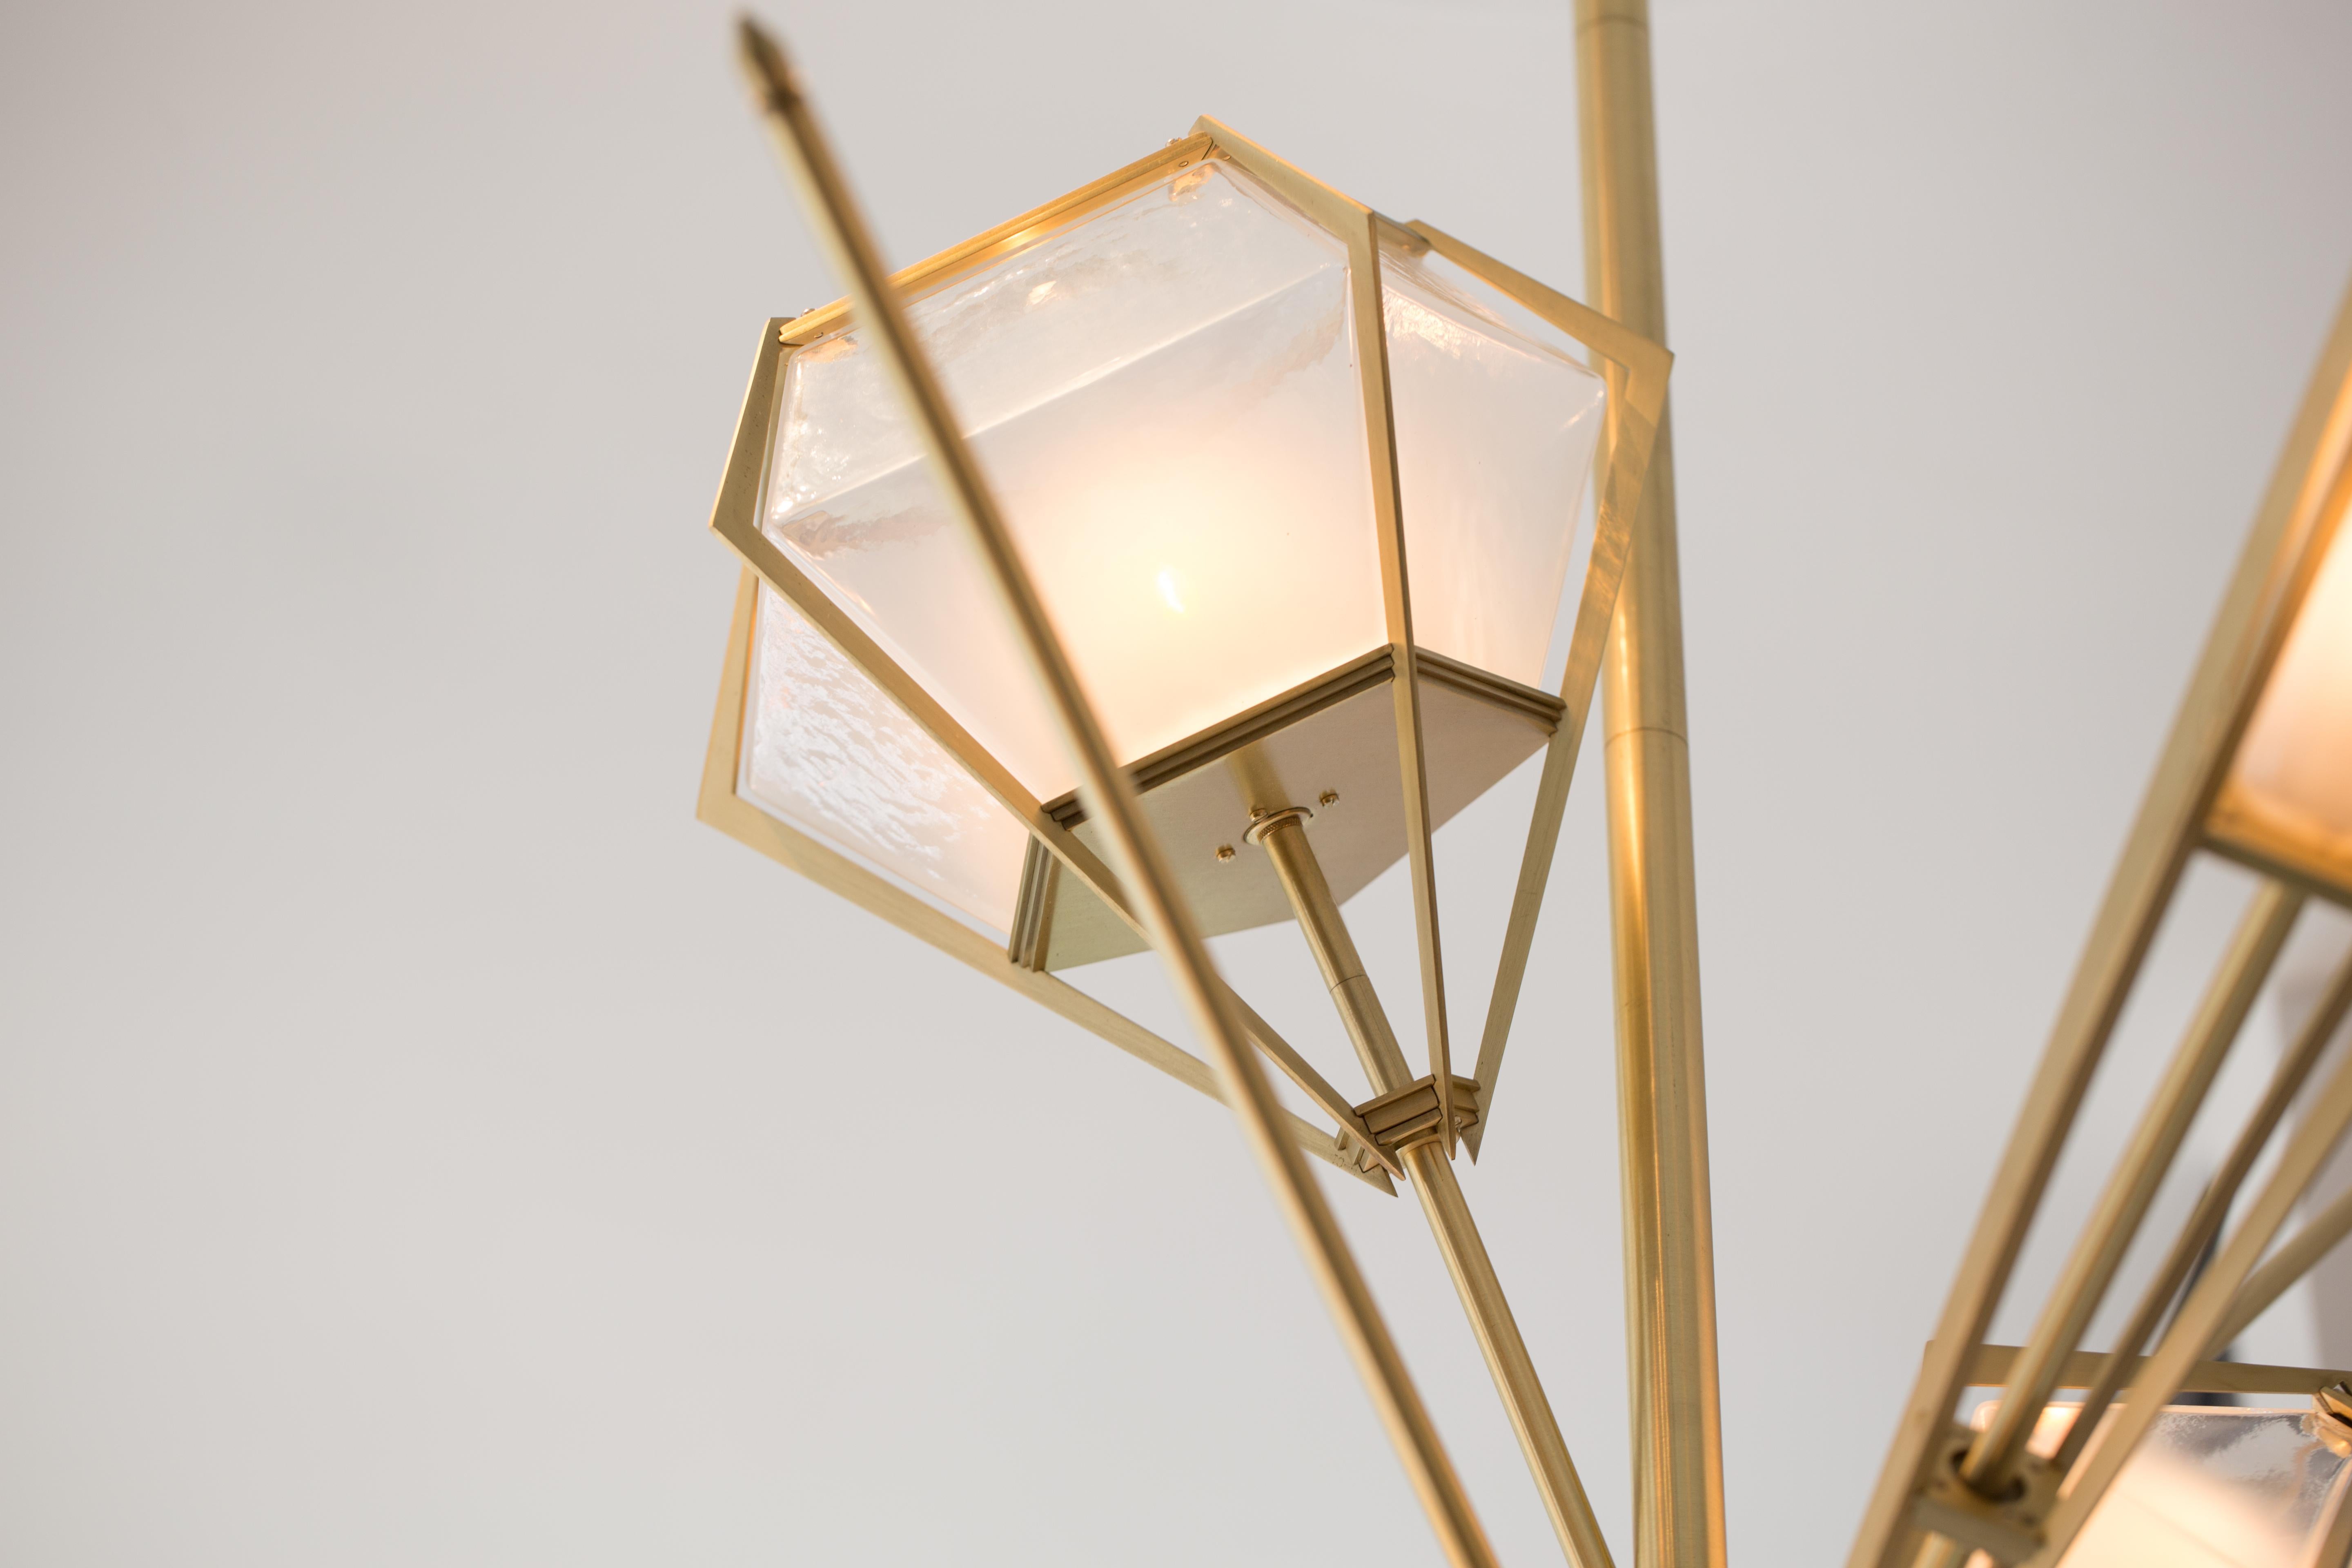 Harlow Large Chandelier in Satin Brass & Alabaster White Glass In New Condition For Sale In New York, NY